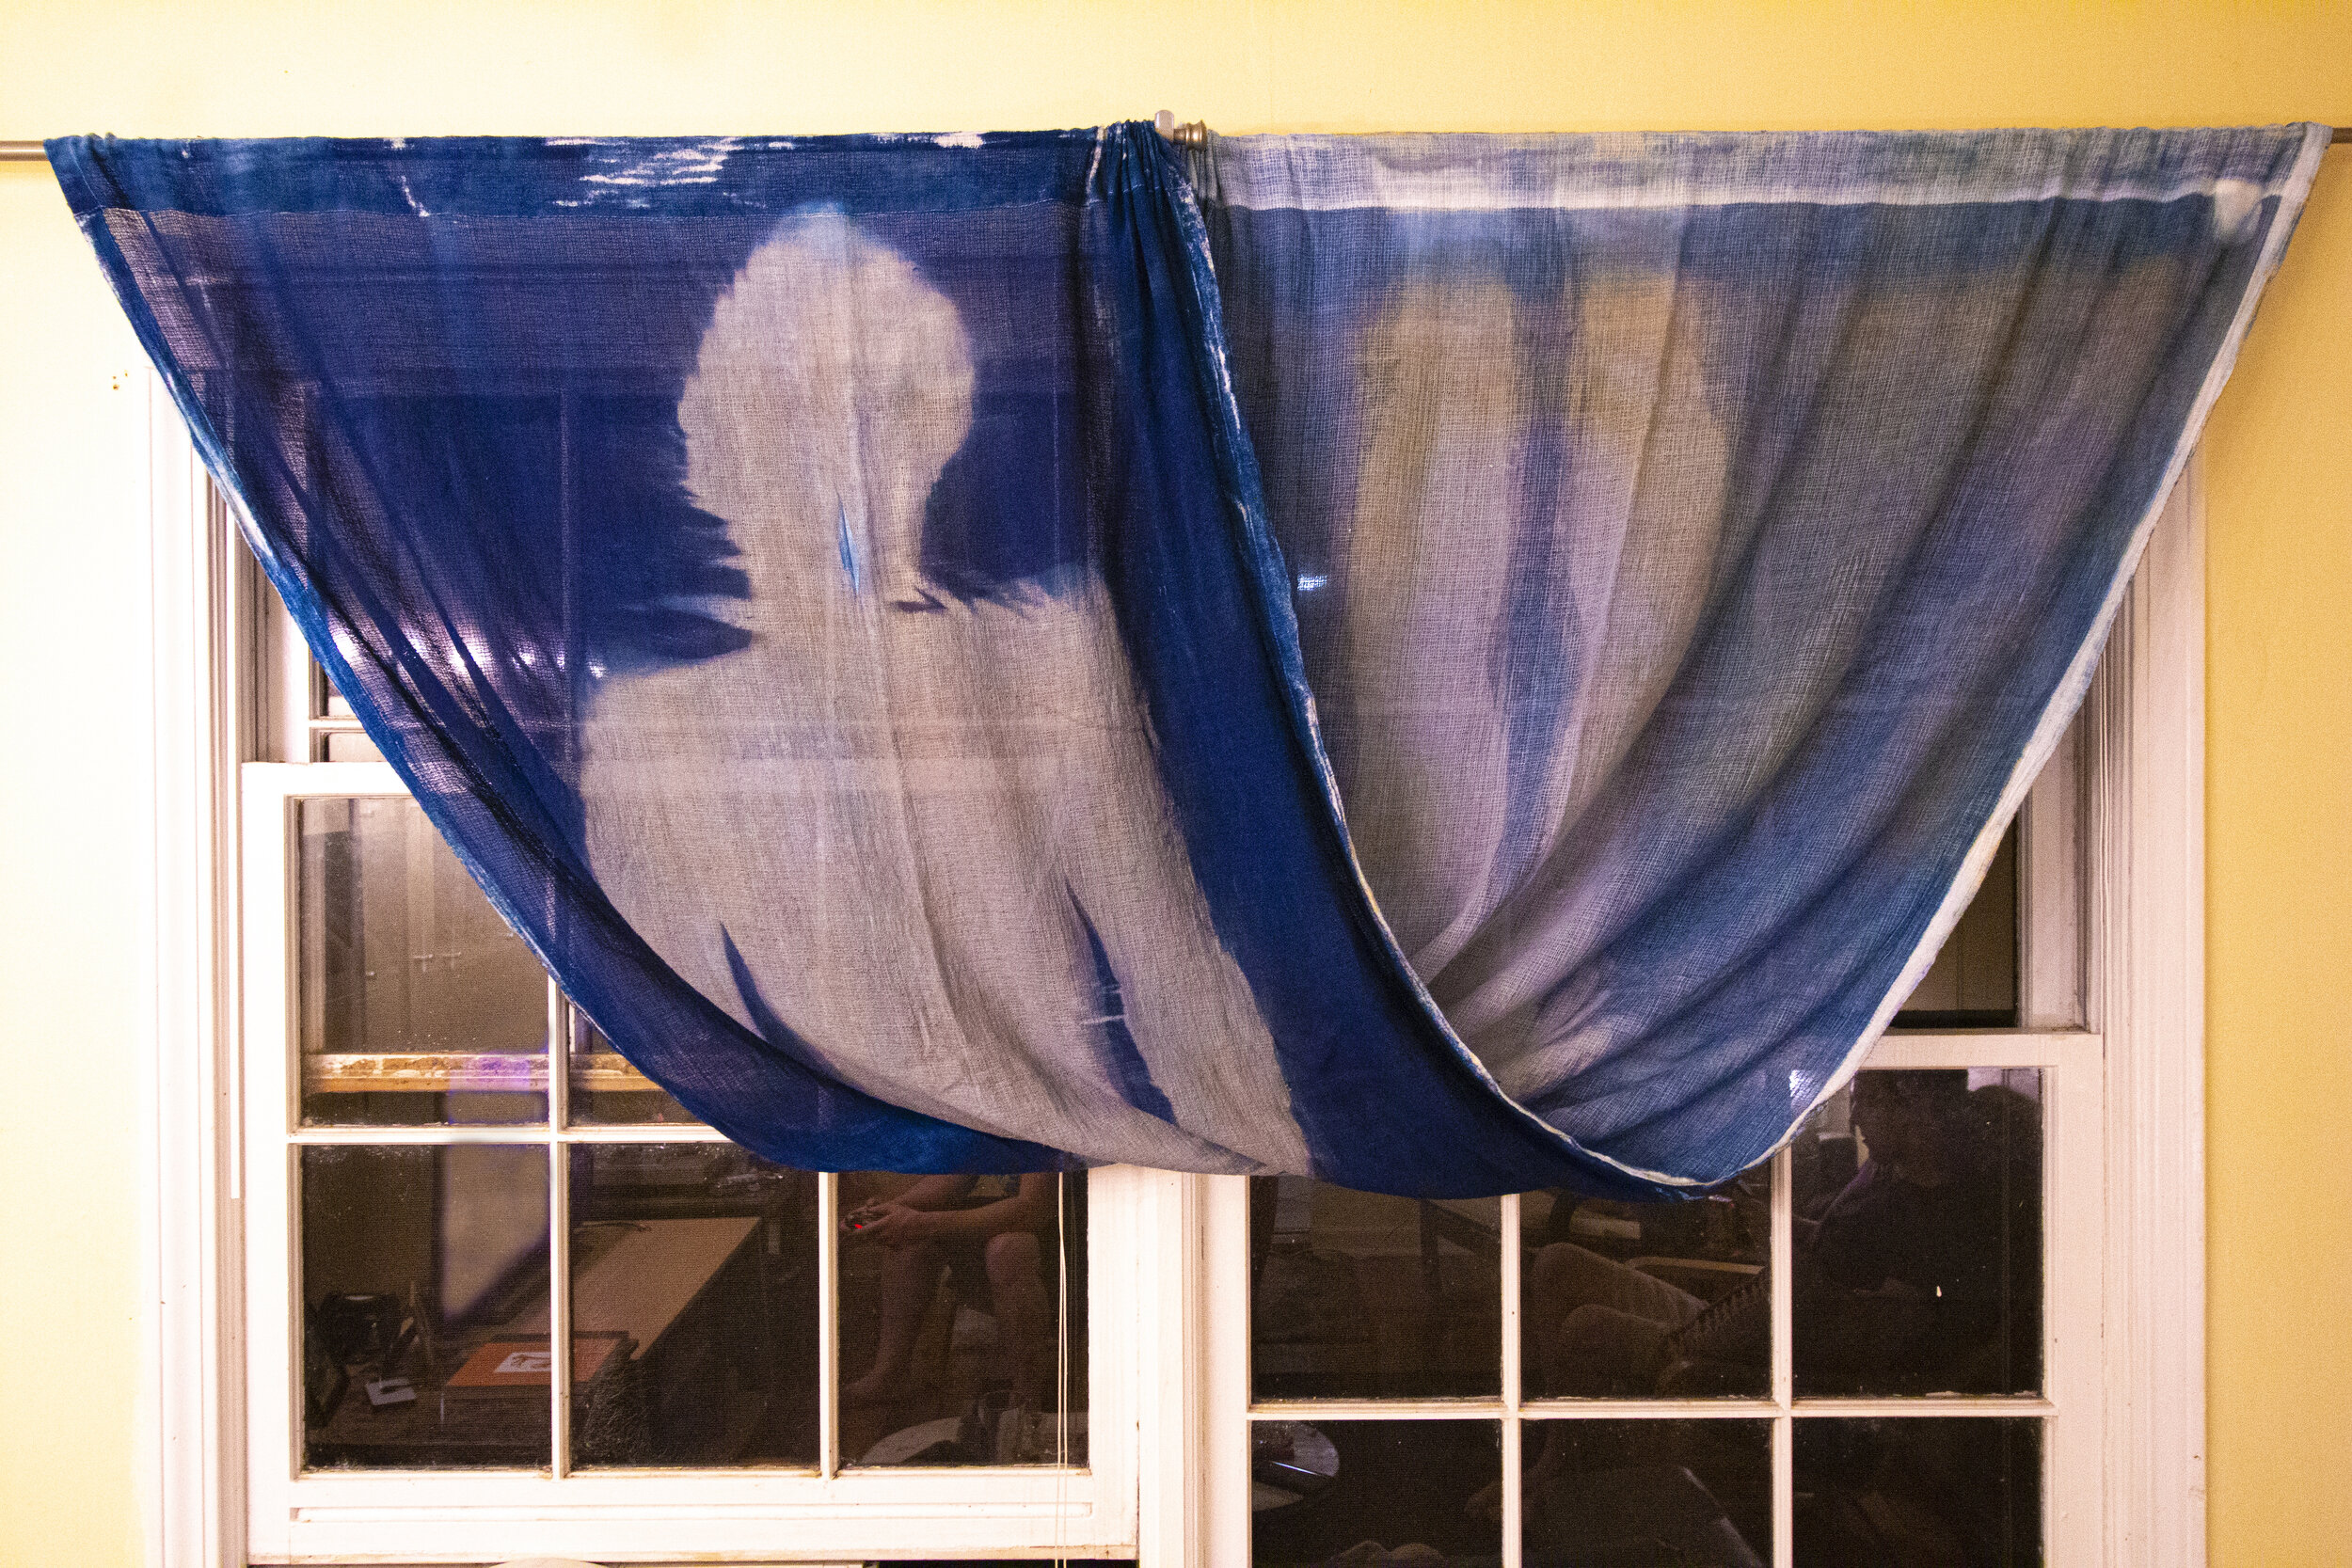 Half Twist [night], 2020, cotton curtain, cyanotype solution, curtain rod, and hardware, 110 x 42 inches